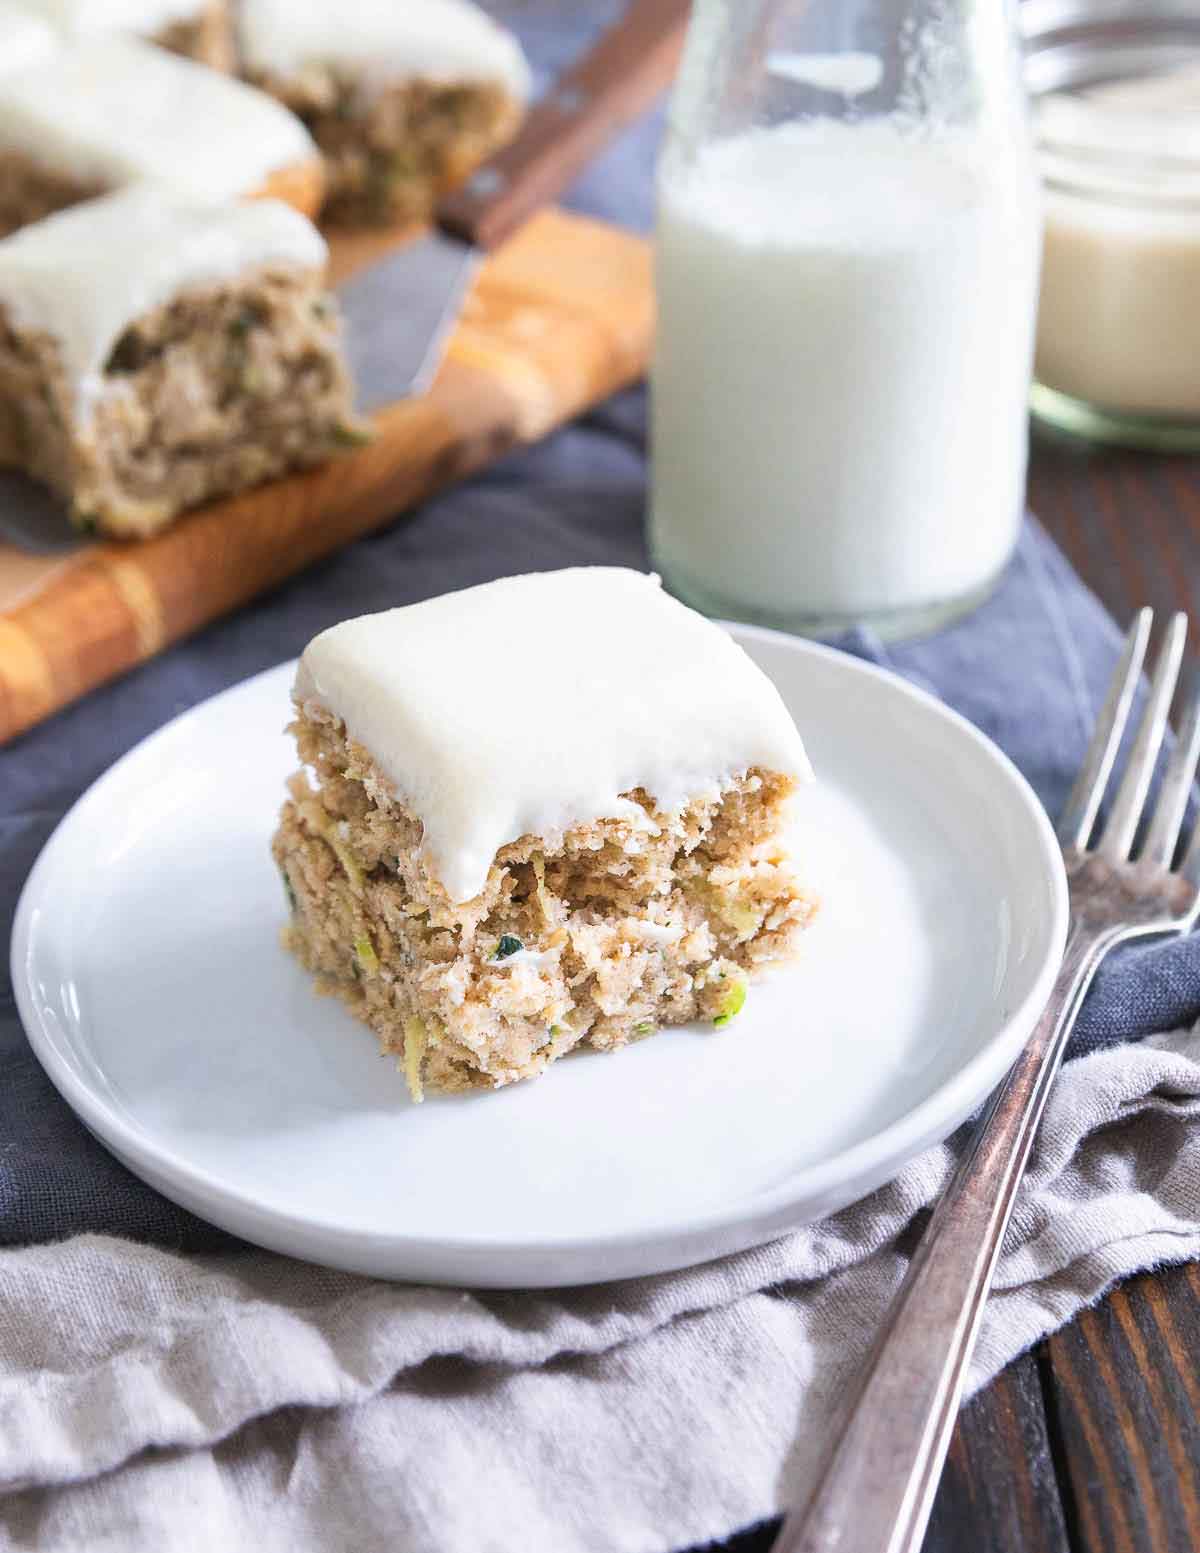 These zucchini bars use healthier, gluten-free ingredients, less sugar and less oil than the classic recipe with a better for you cream cheese icing too!